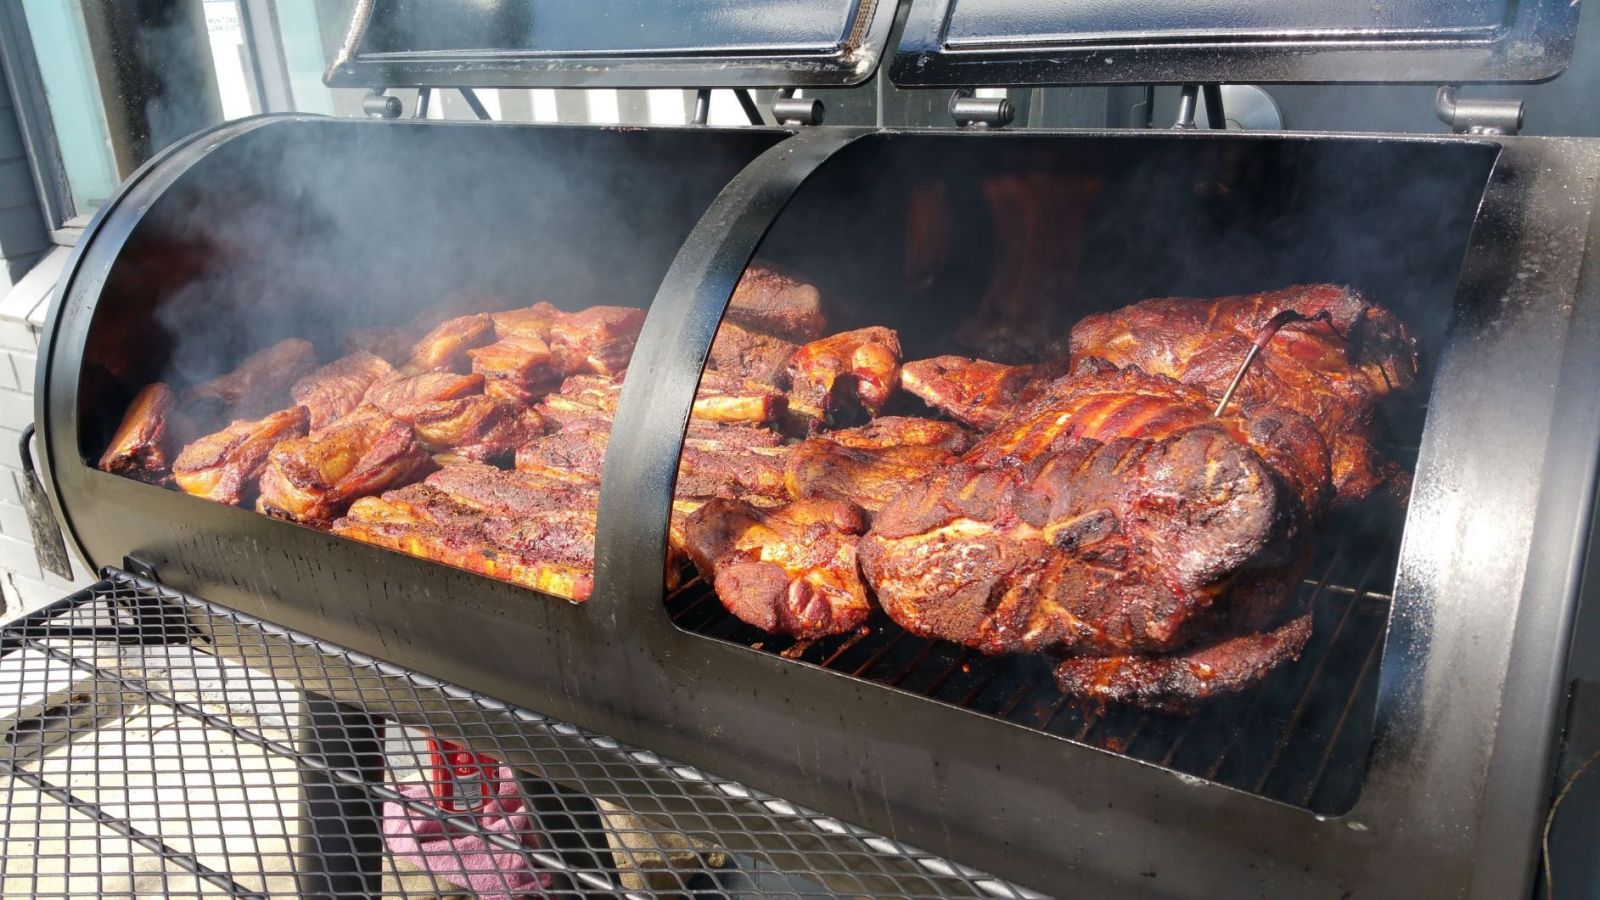 An image of the Flaming coals offset smoker loaded with a variety of different smoked meats